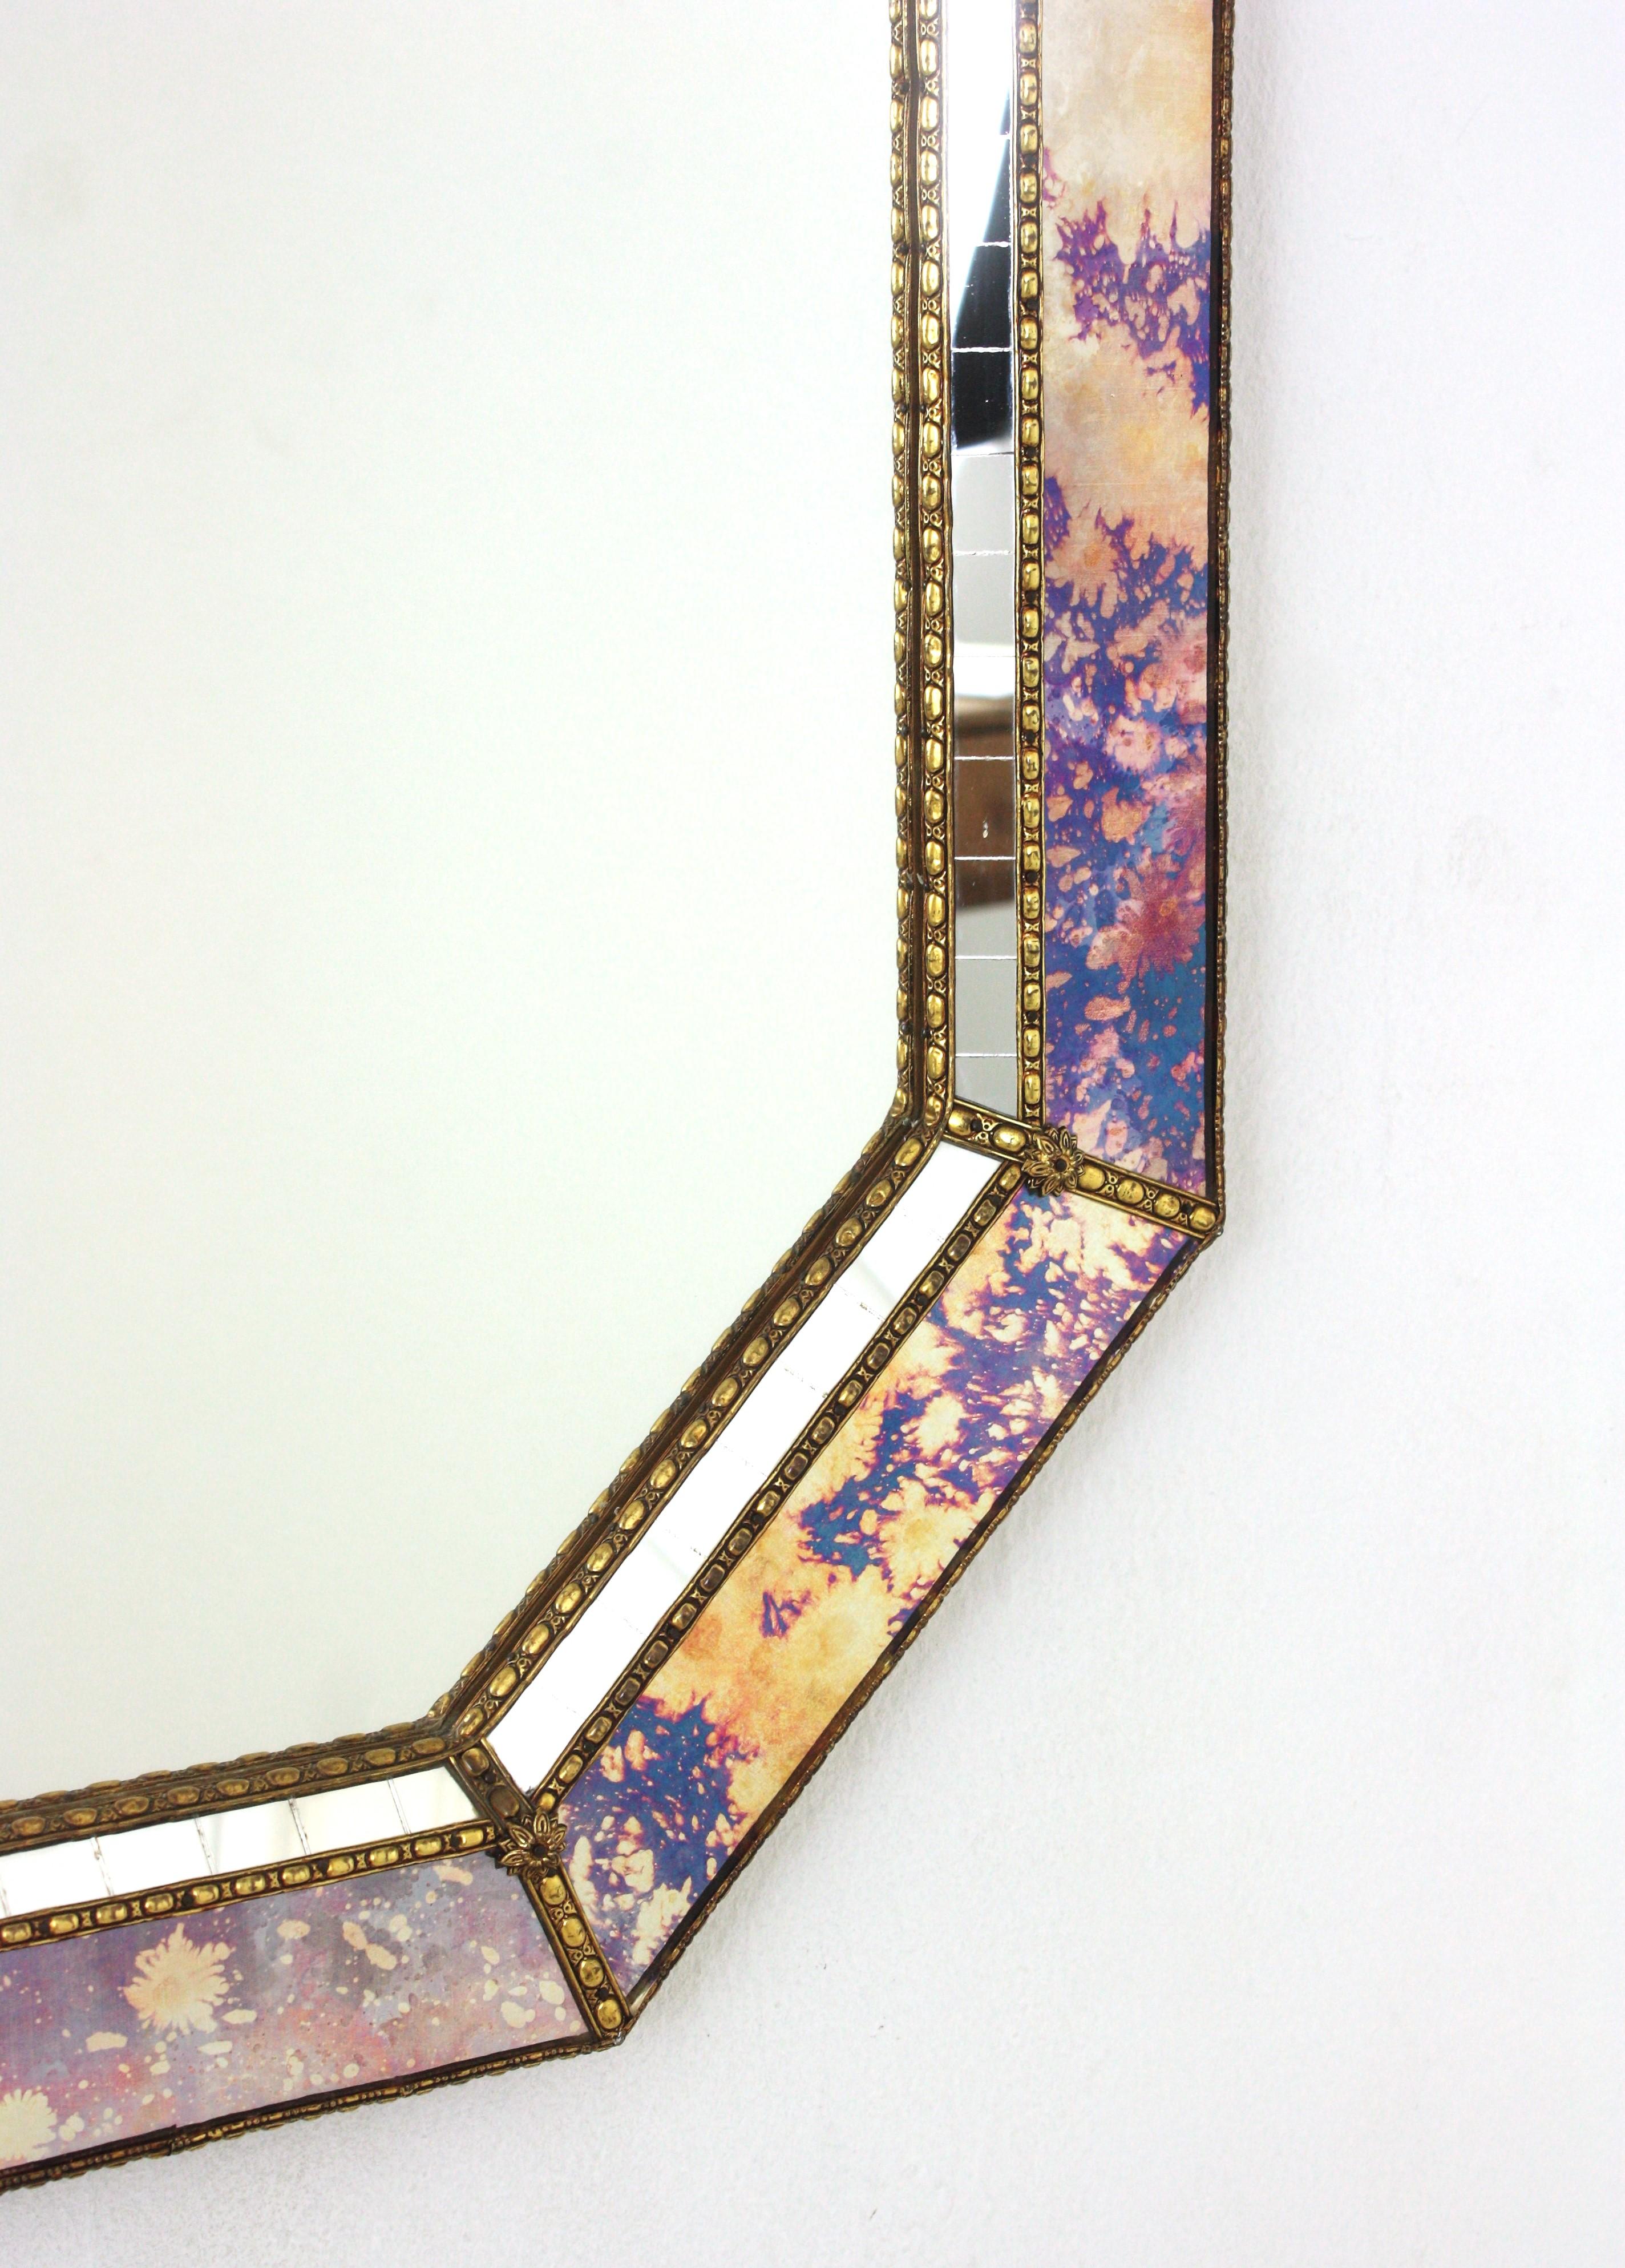 Metal Octagonal Venetian Style Mirrors with Pink Purple Glass & Brass Details, Pair For Sale